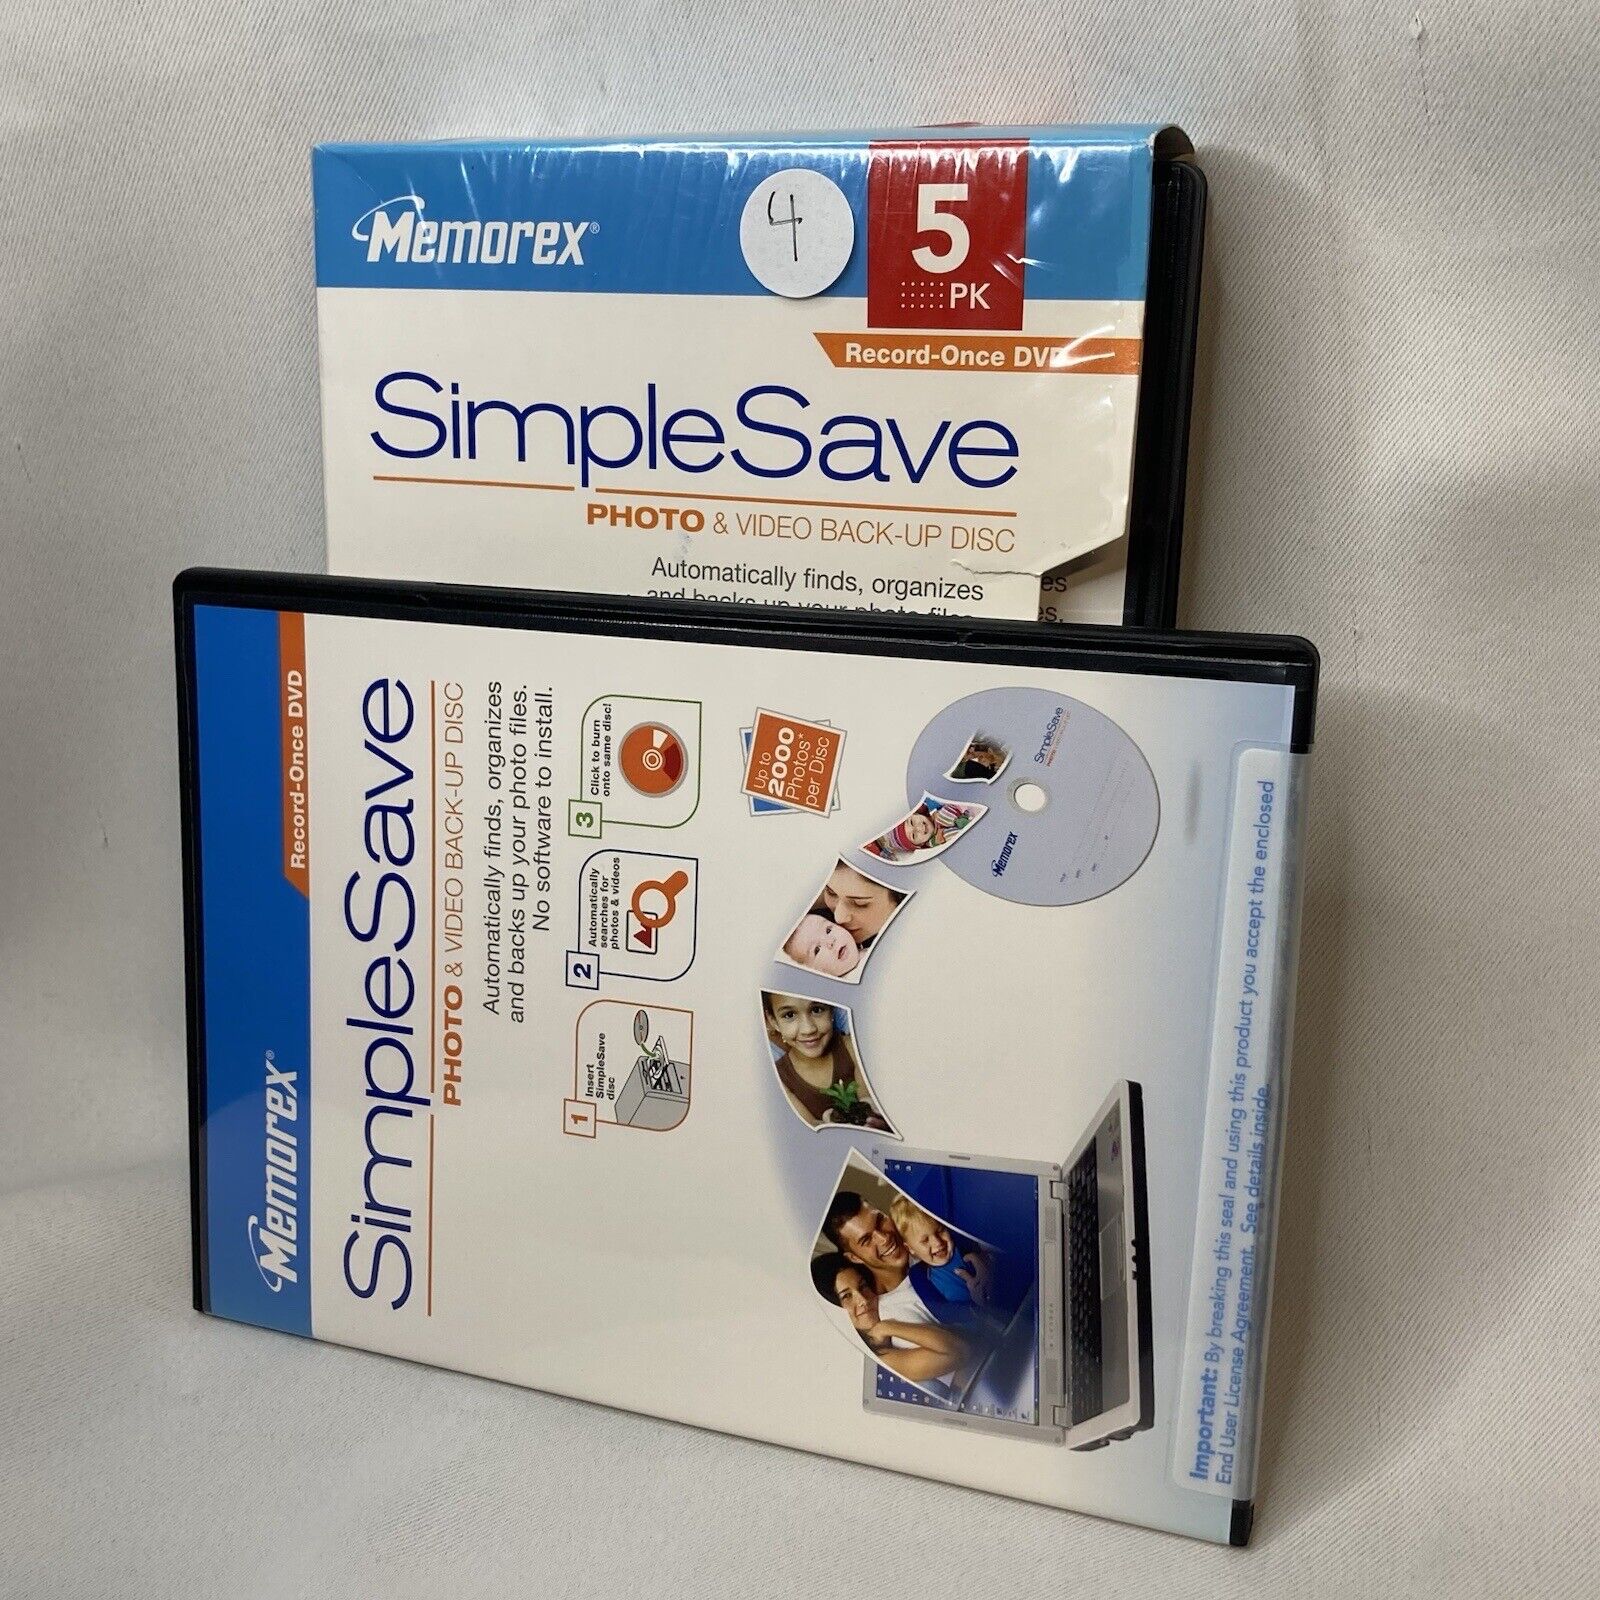 Memorex 4 Of 5 Pack DVD /CD Simple Save Photo & Video Back Up